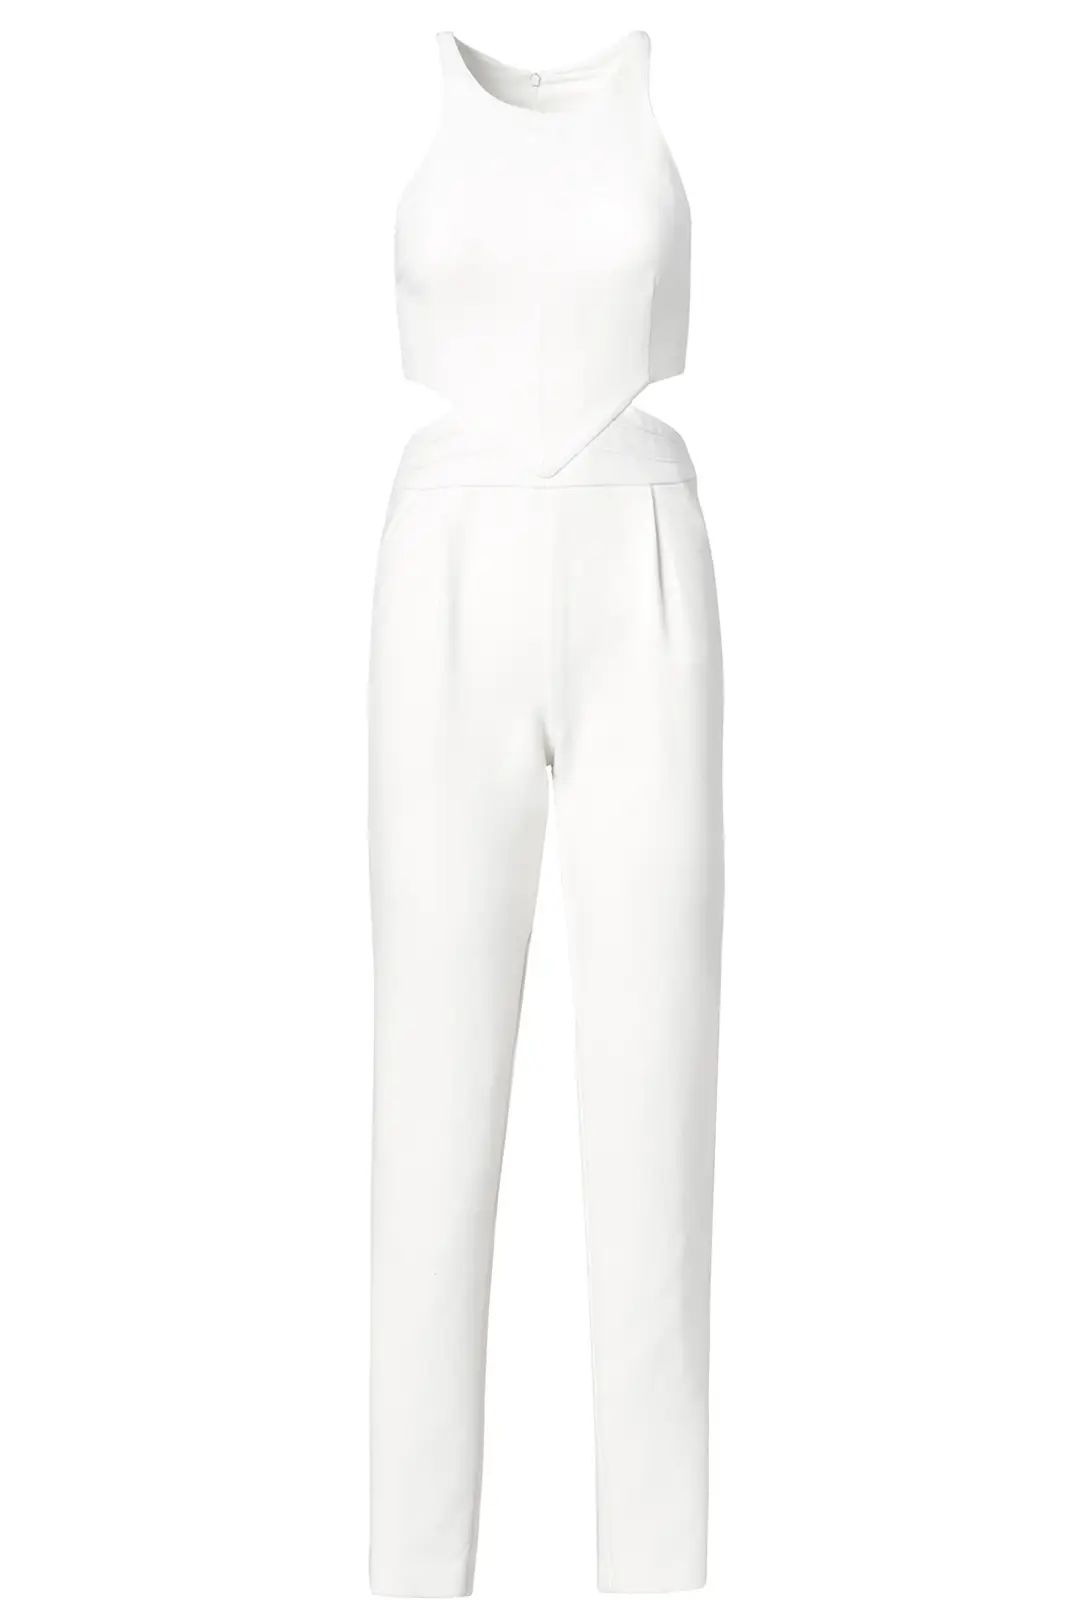 Hunter Bell Bright Side Jumpsuit | Rent The Runway